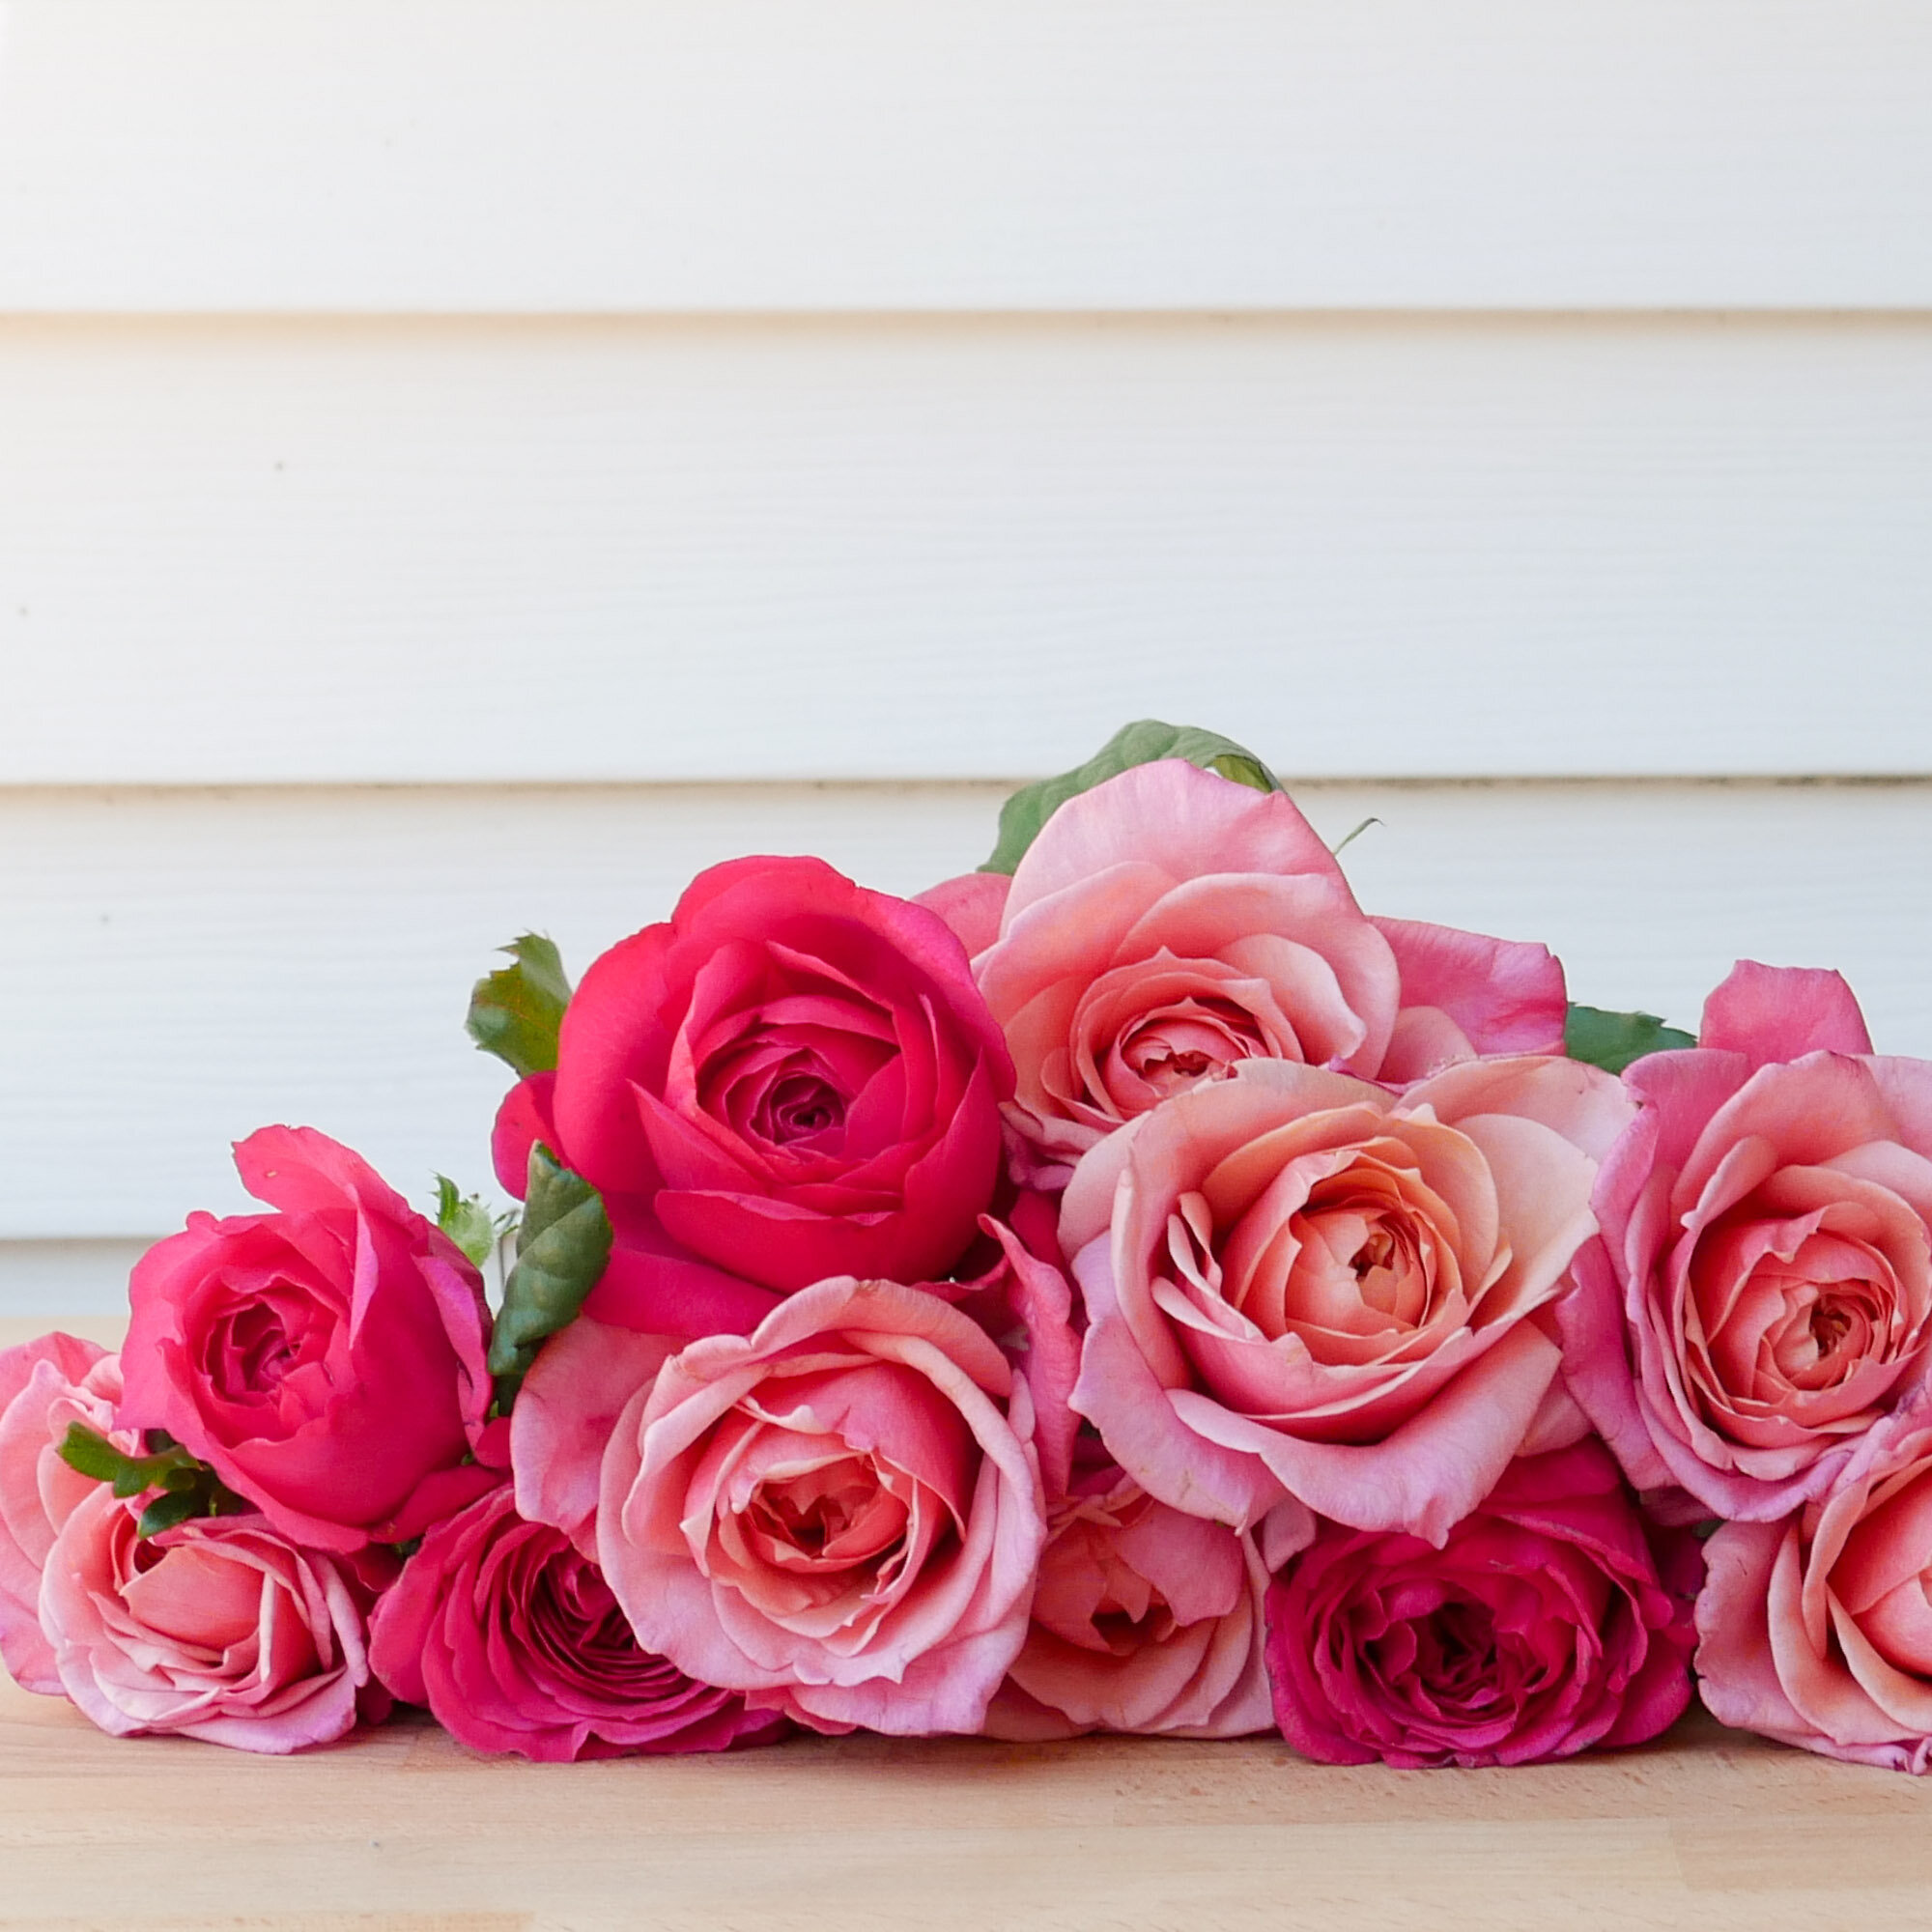 A close up of several pink roses laying on a table